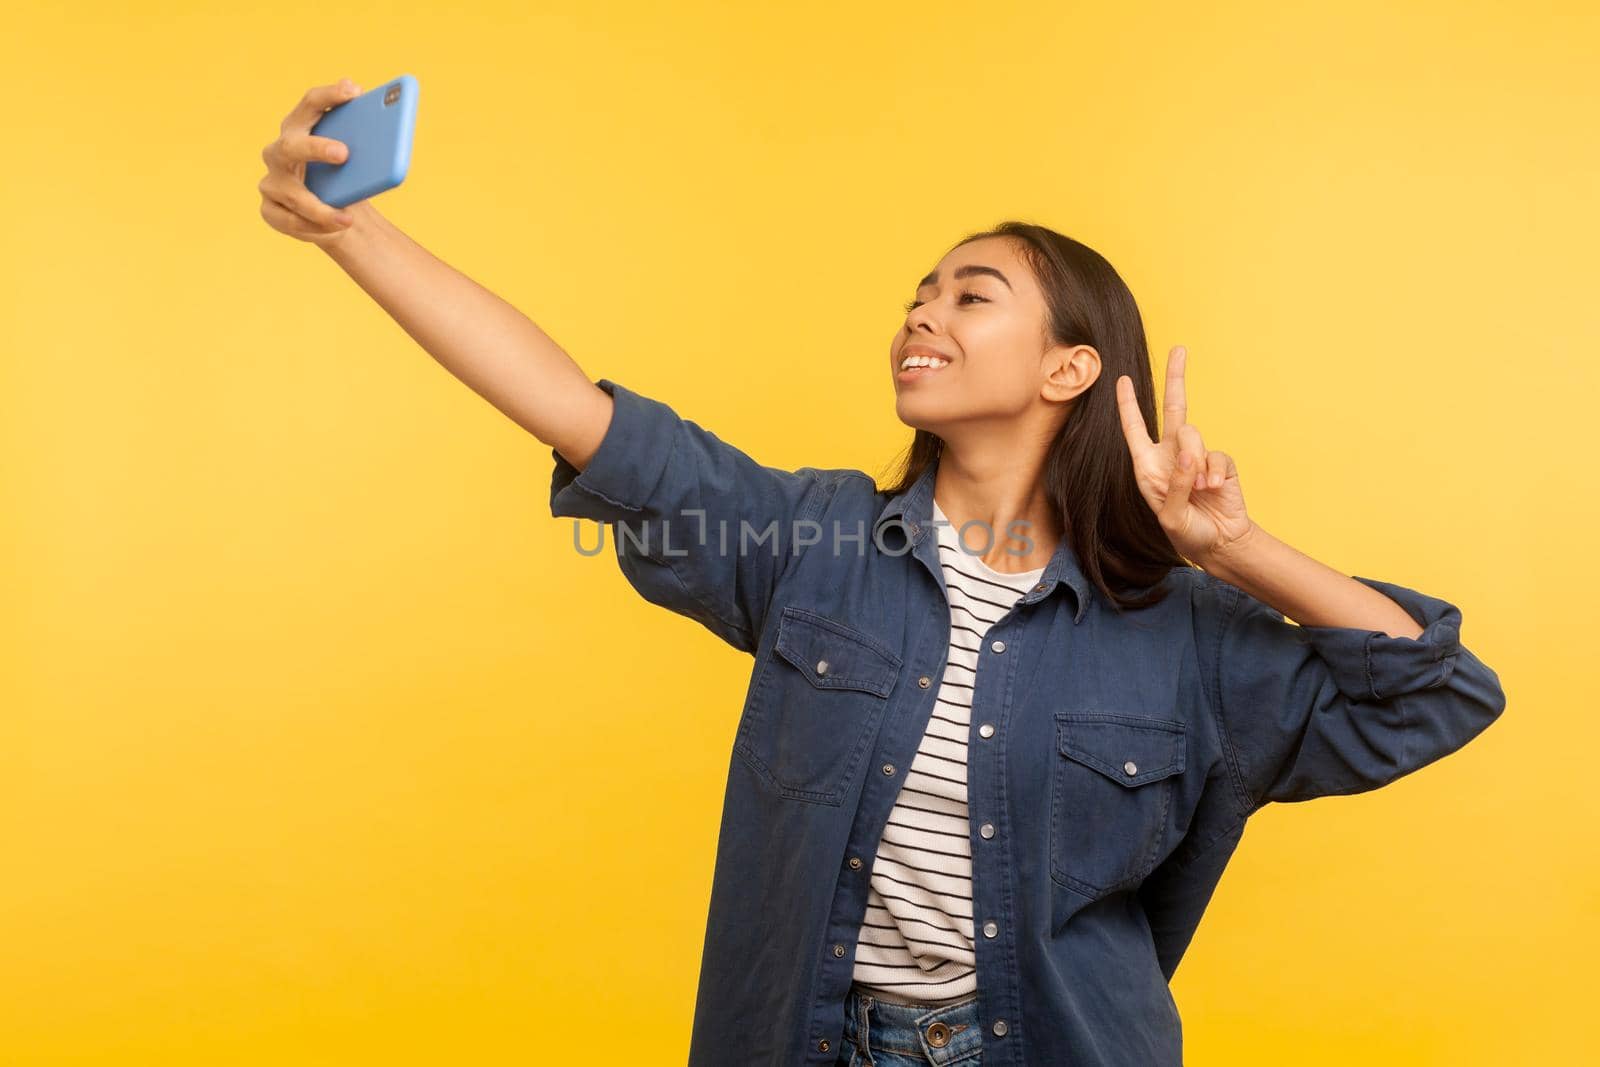 Portrait of successful stylish girl in denim shirt taking selfie or talking on video call and showing victory, peace gesture, pleasant online communication via mobile phone app. indoor studio shot